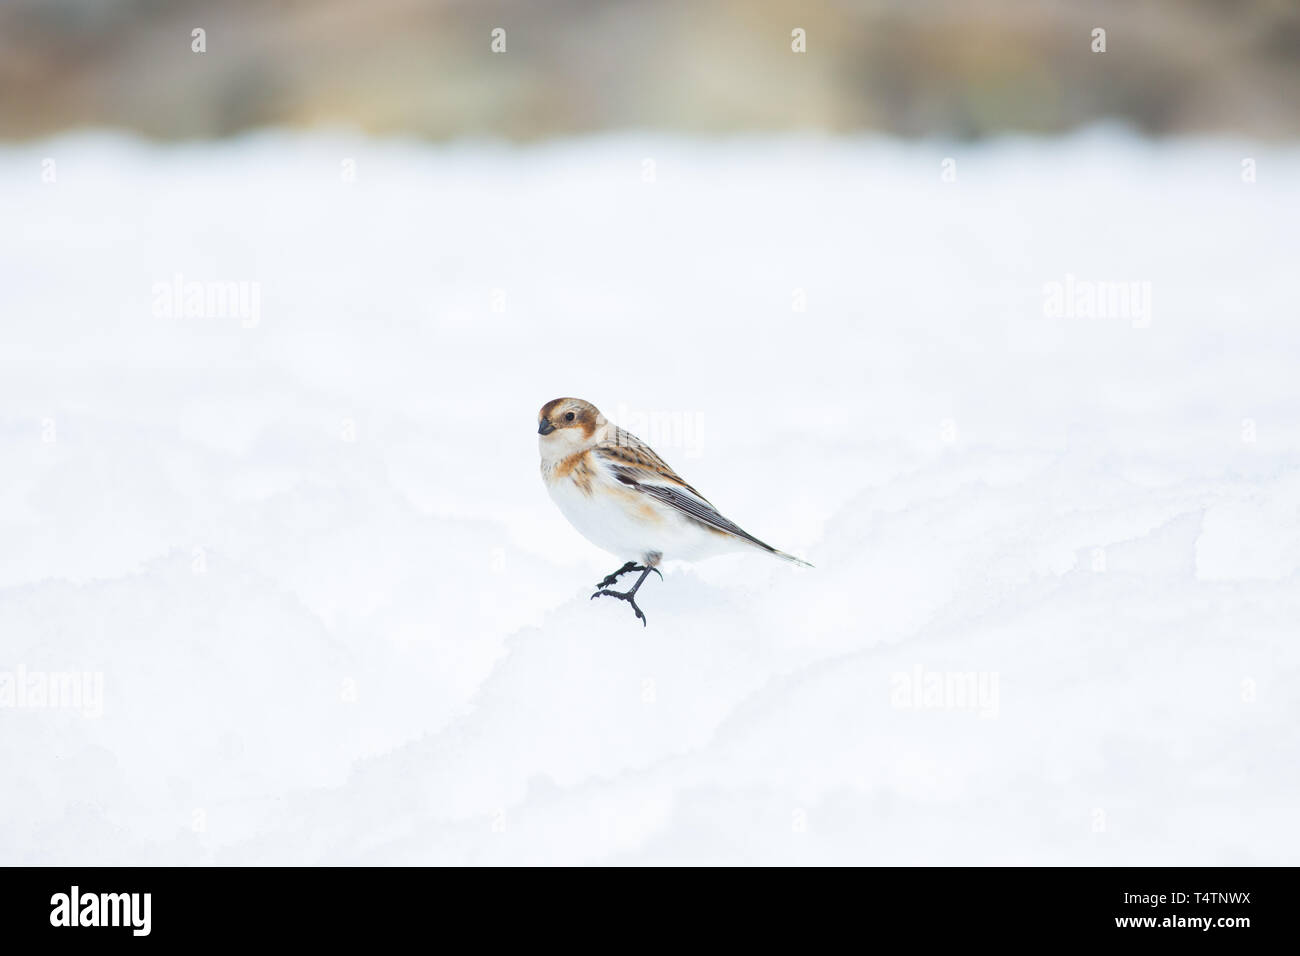 Snow bunting on Ben Nevis, an arctic bird they exist on mountaintops in Scotland Stock Photo